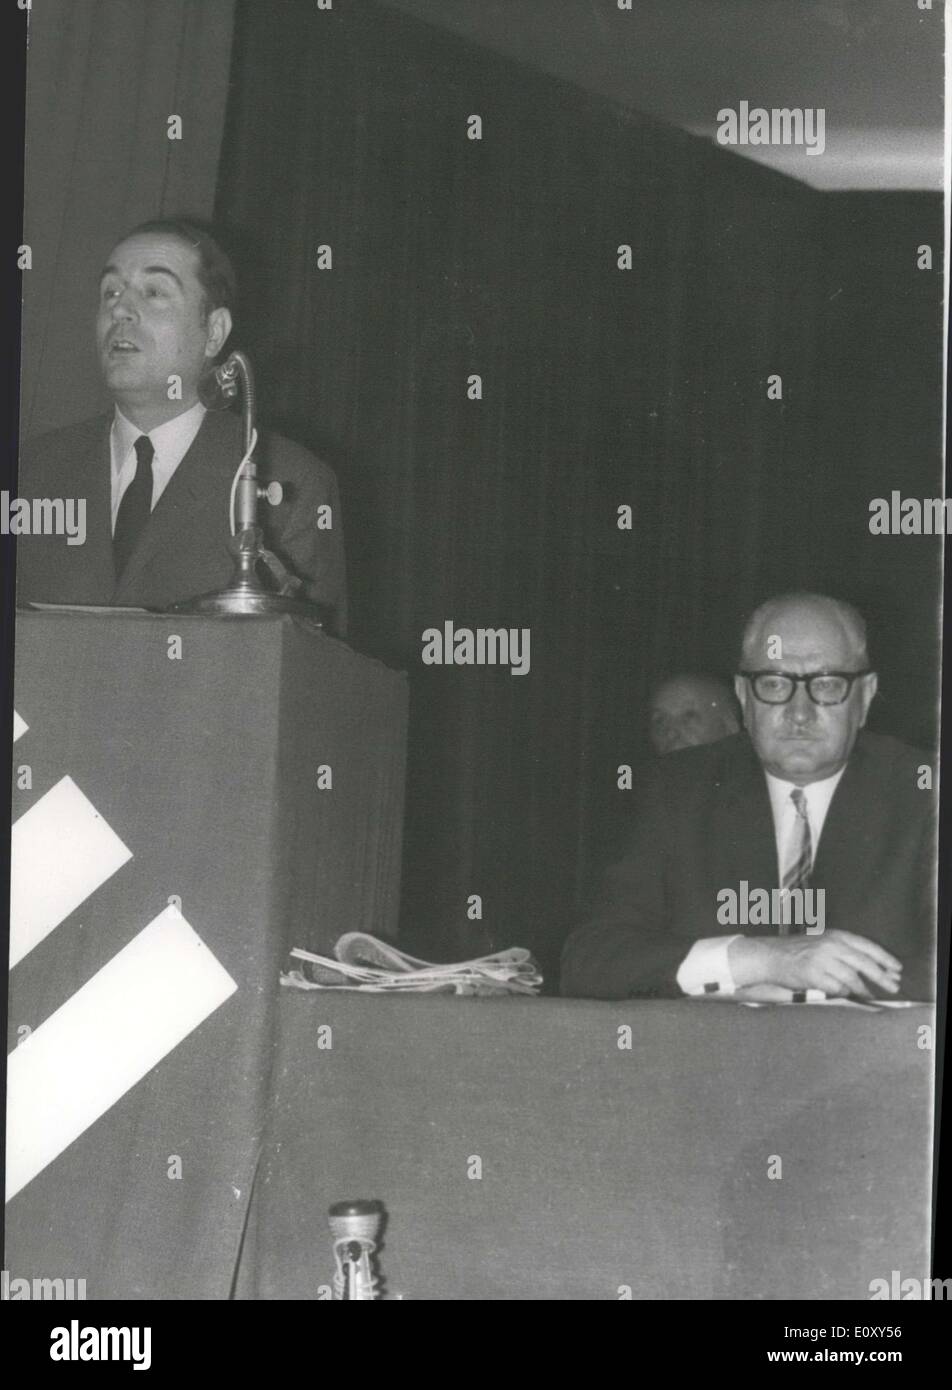 Jan. 28, 1968 - The Socialist Party's French Section of the Workers' International held a National Congr For the first time, Stock Photo